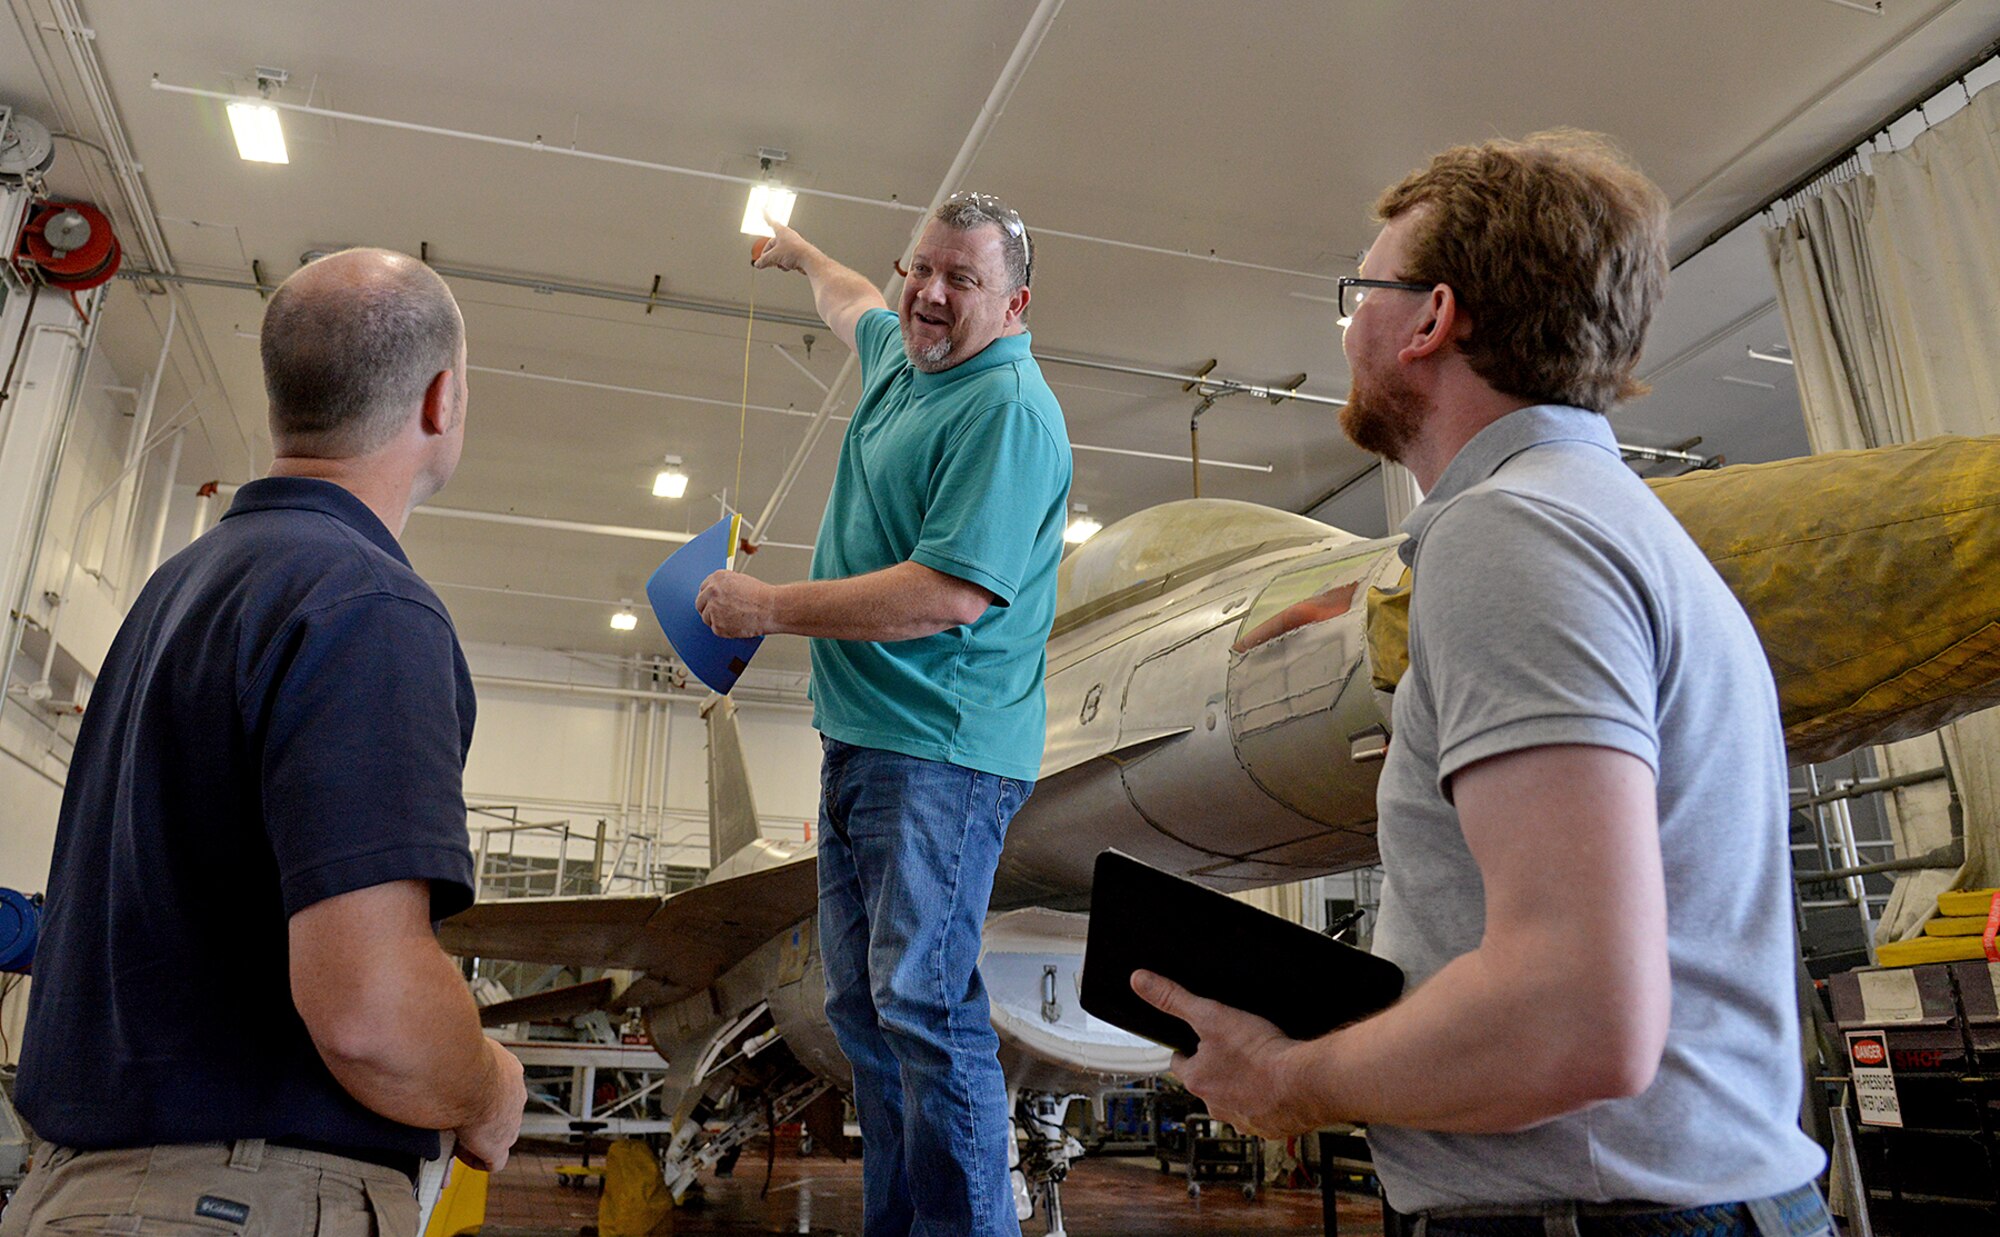 Shane Jepson, facility manager for building 220, points at new energy saving light fixtures on the ceiling in a depot maintenance facility to auditors Rob Ellis (left) and Jonathan Clark